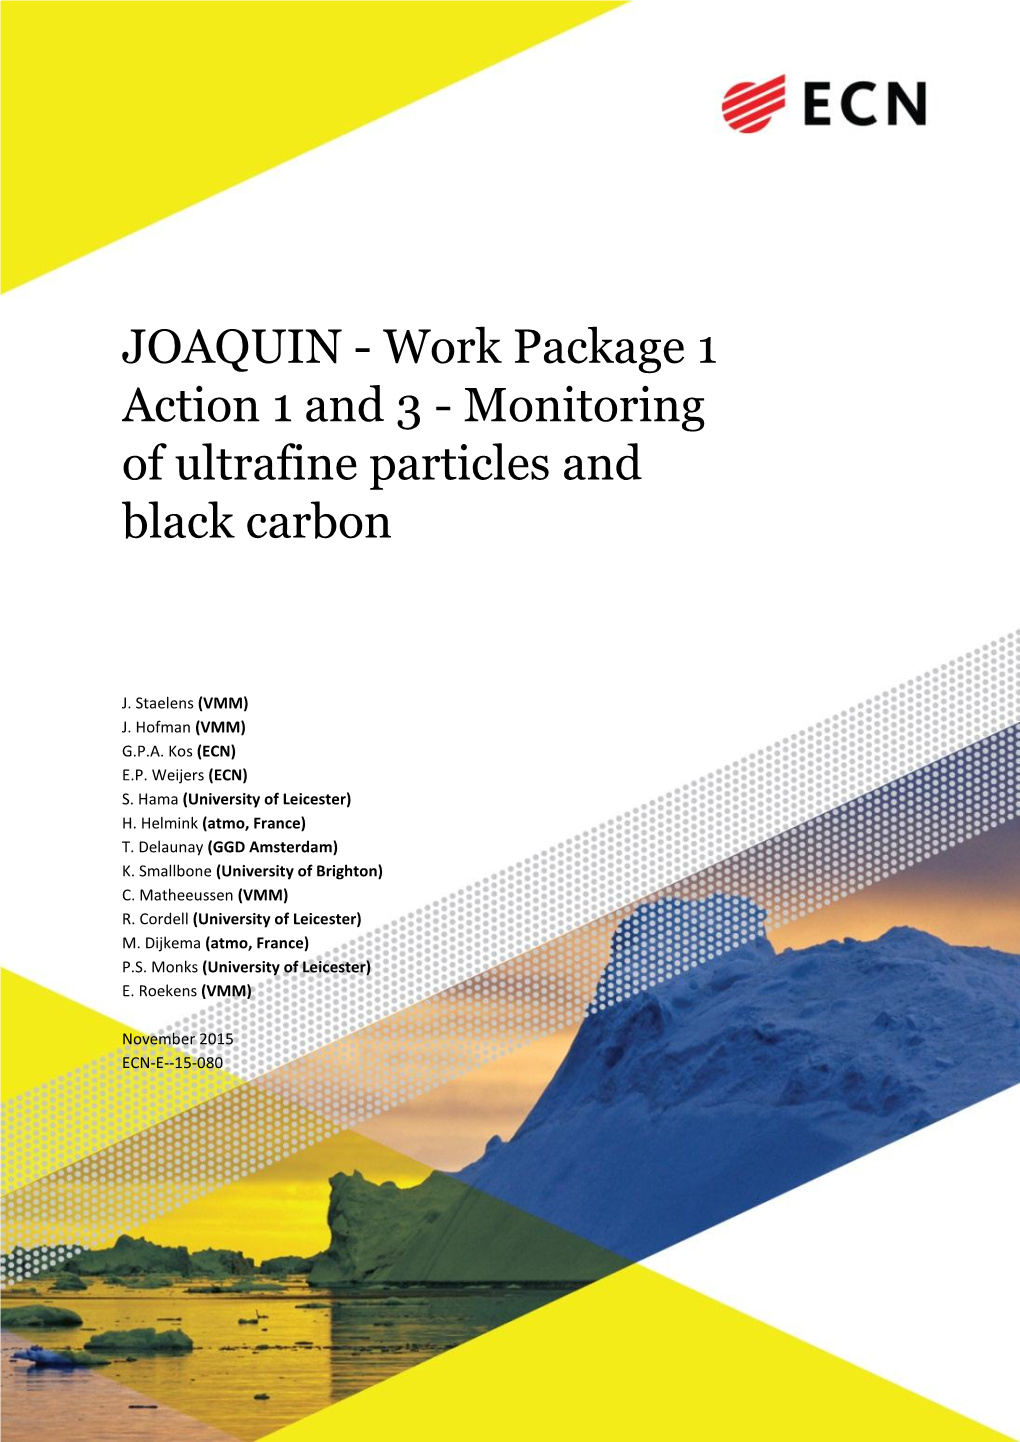 Monitoring of Ultrafine Particles and Black Carbon